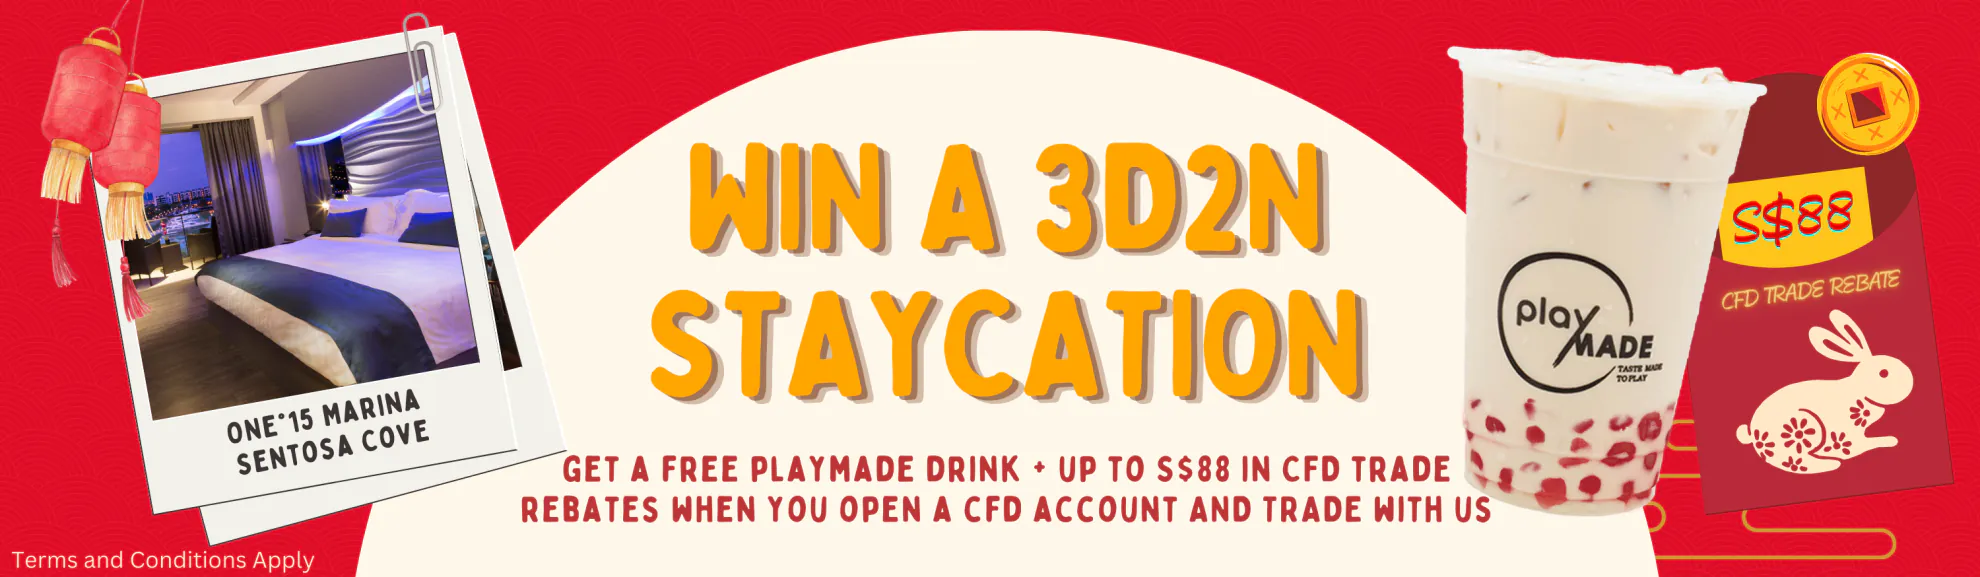 CNY Campaign (CFD WEBSITE) STAYCATION